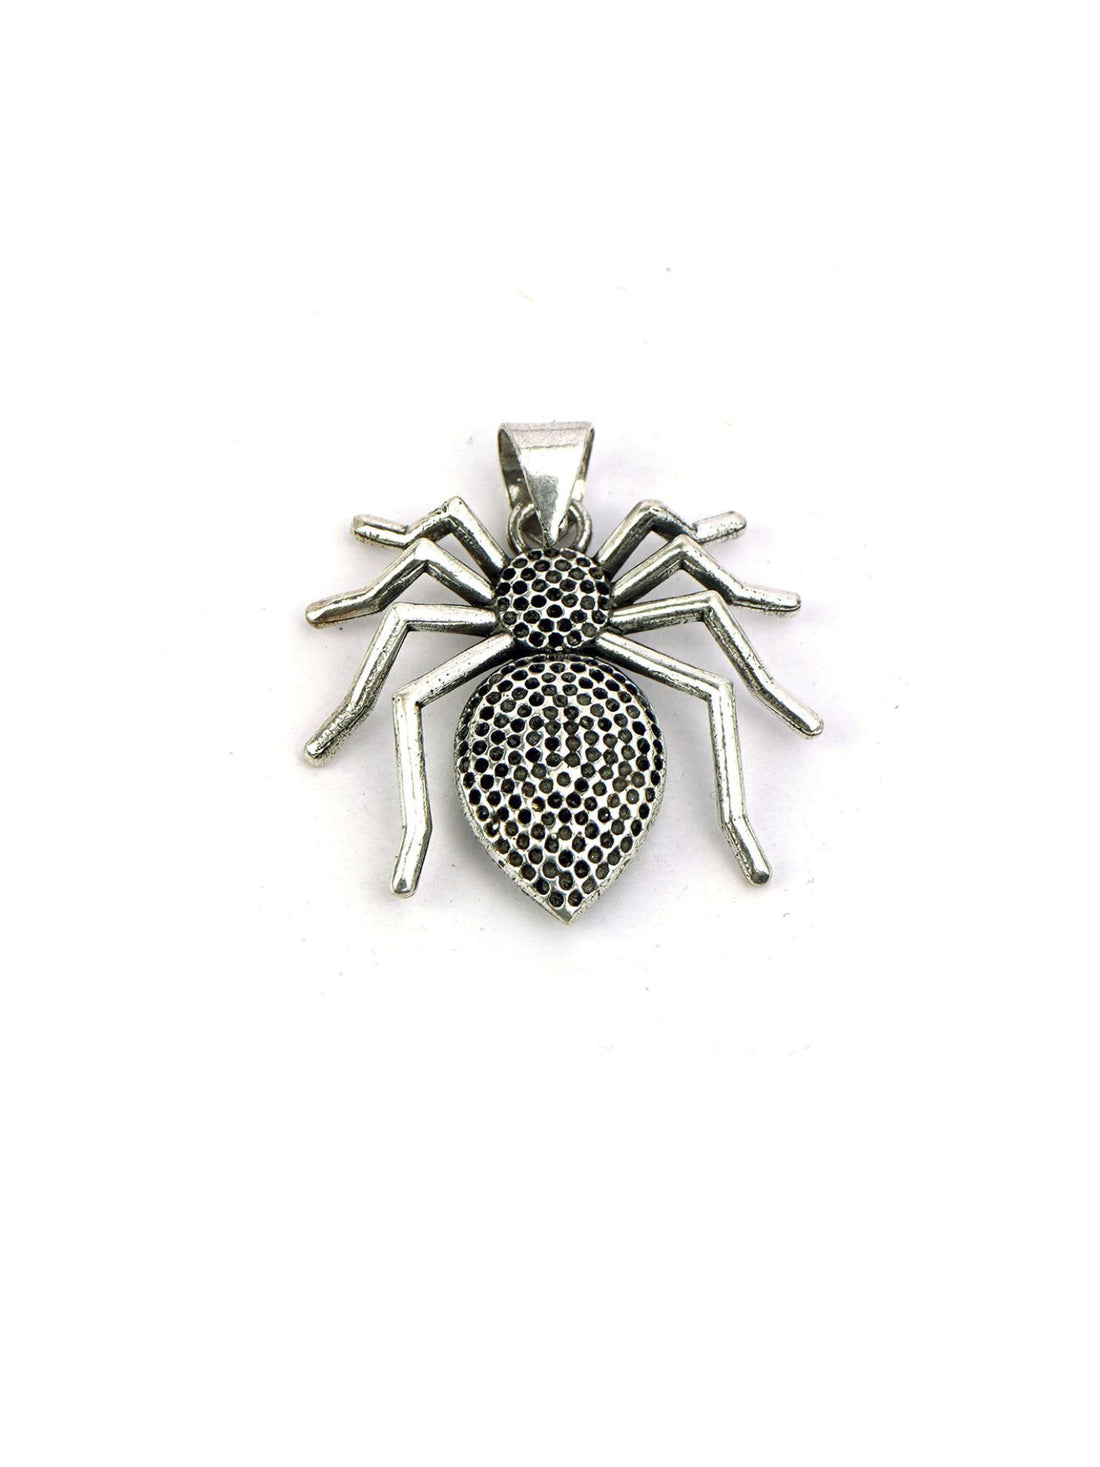 Brass-Plated Textured Spider-Shaped Pendant with Chain By Studio One Love